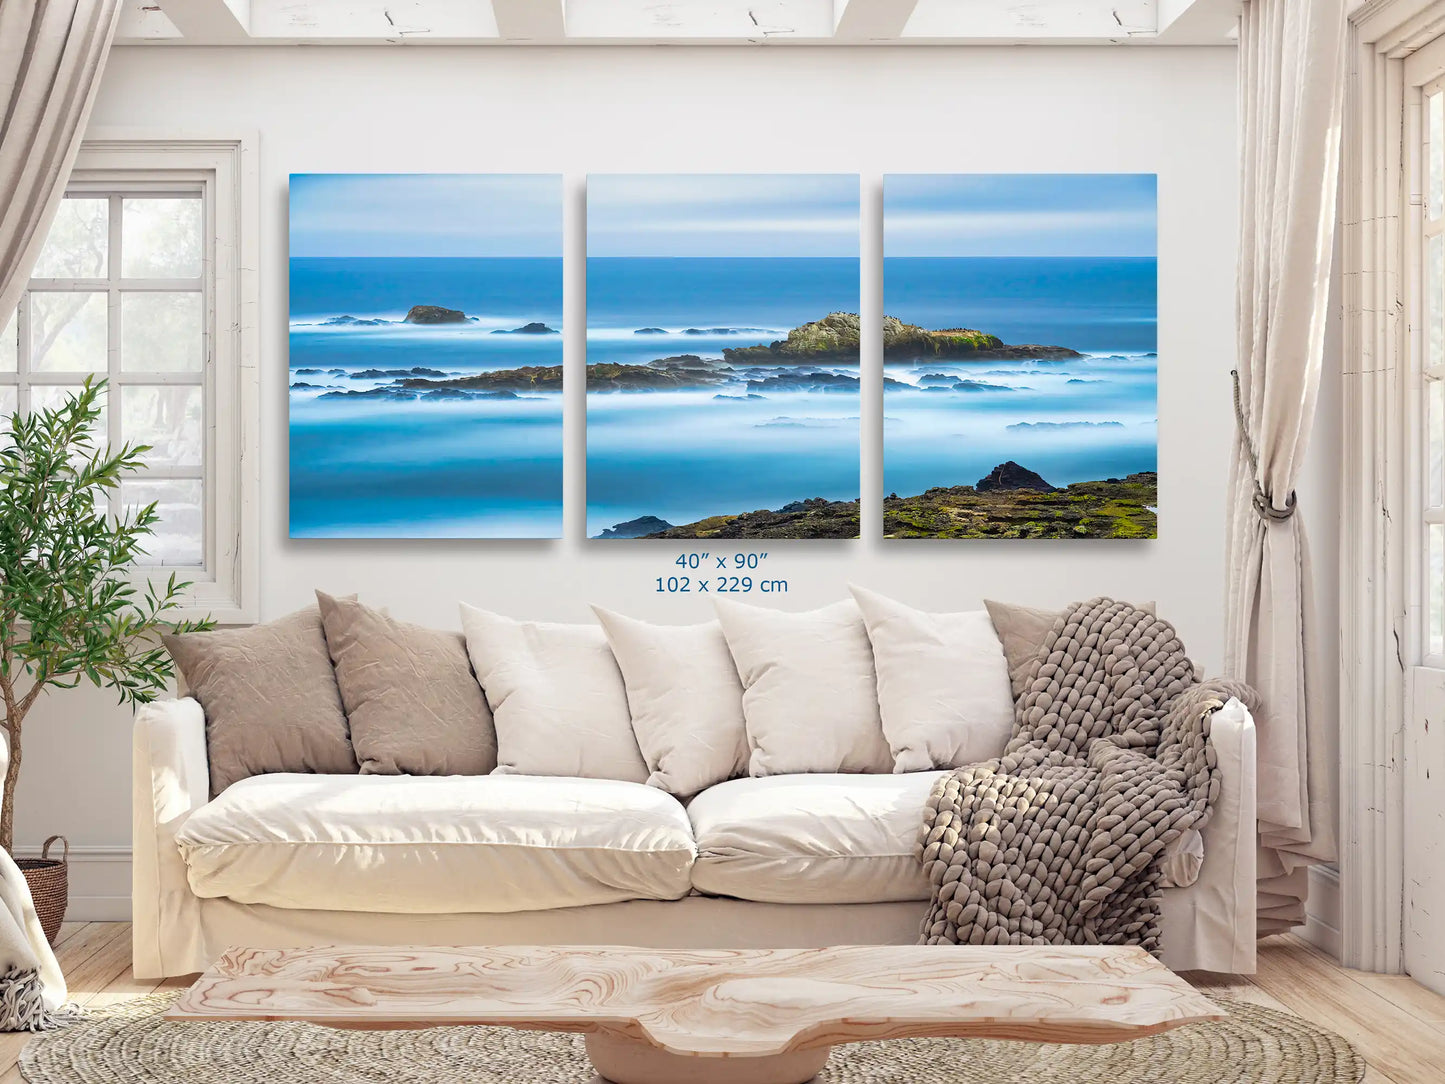 An impressive 40"x90" Point Lobos seascape, spread across four panels, offering a panoramic ocean experience in a living room.